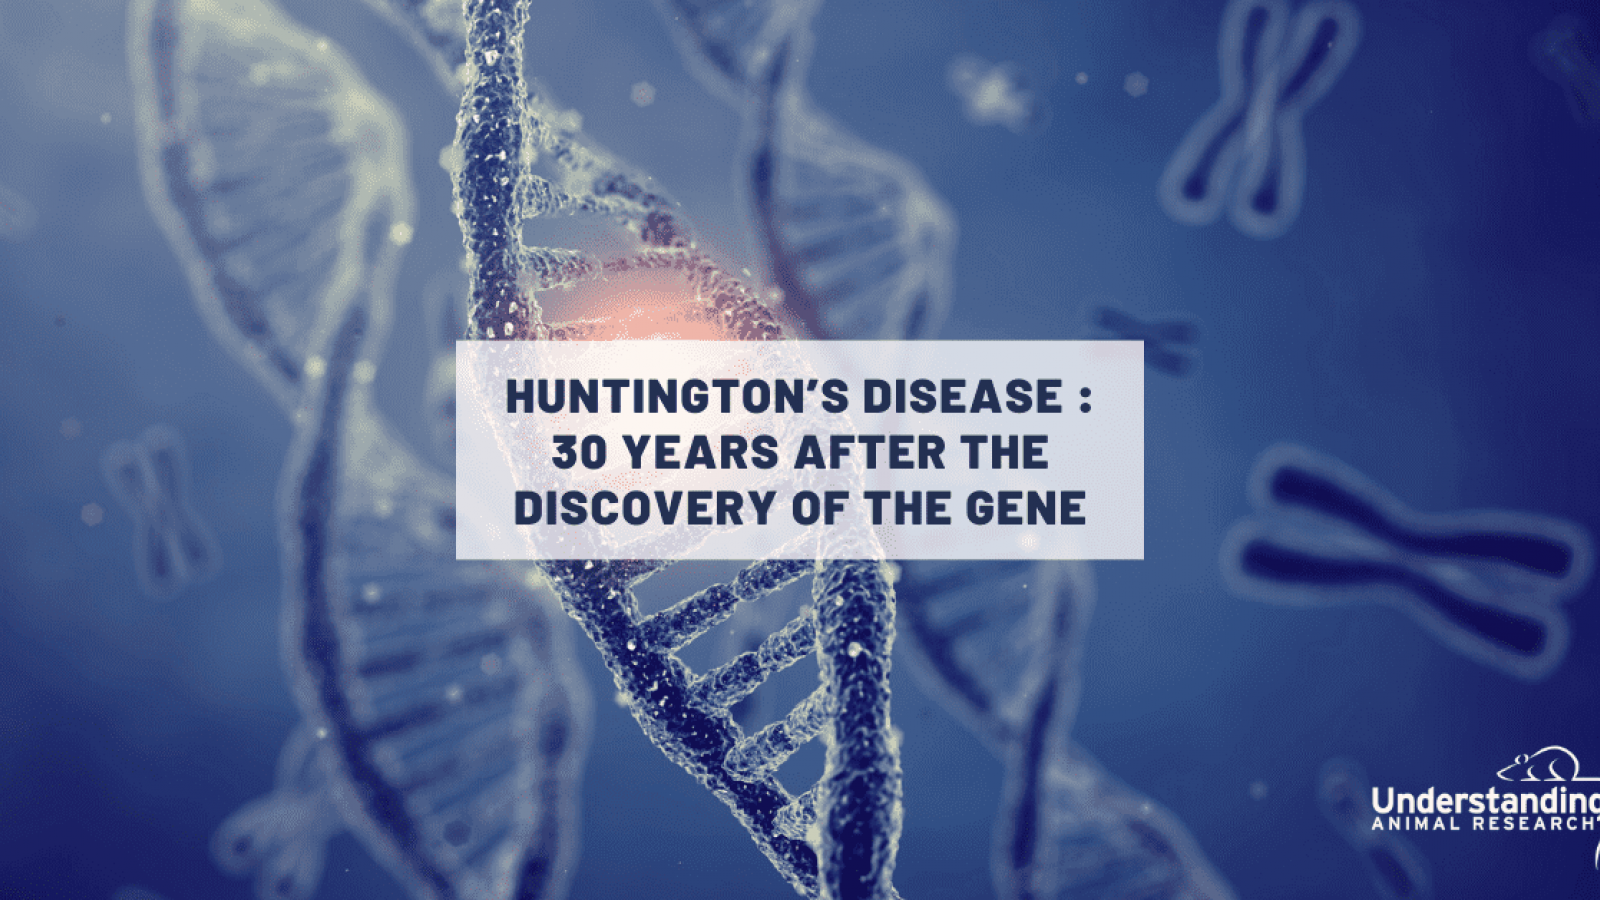 Huntington’s disease: 30 years after the discovery of the gene